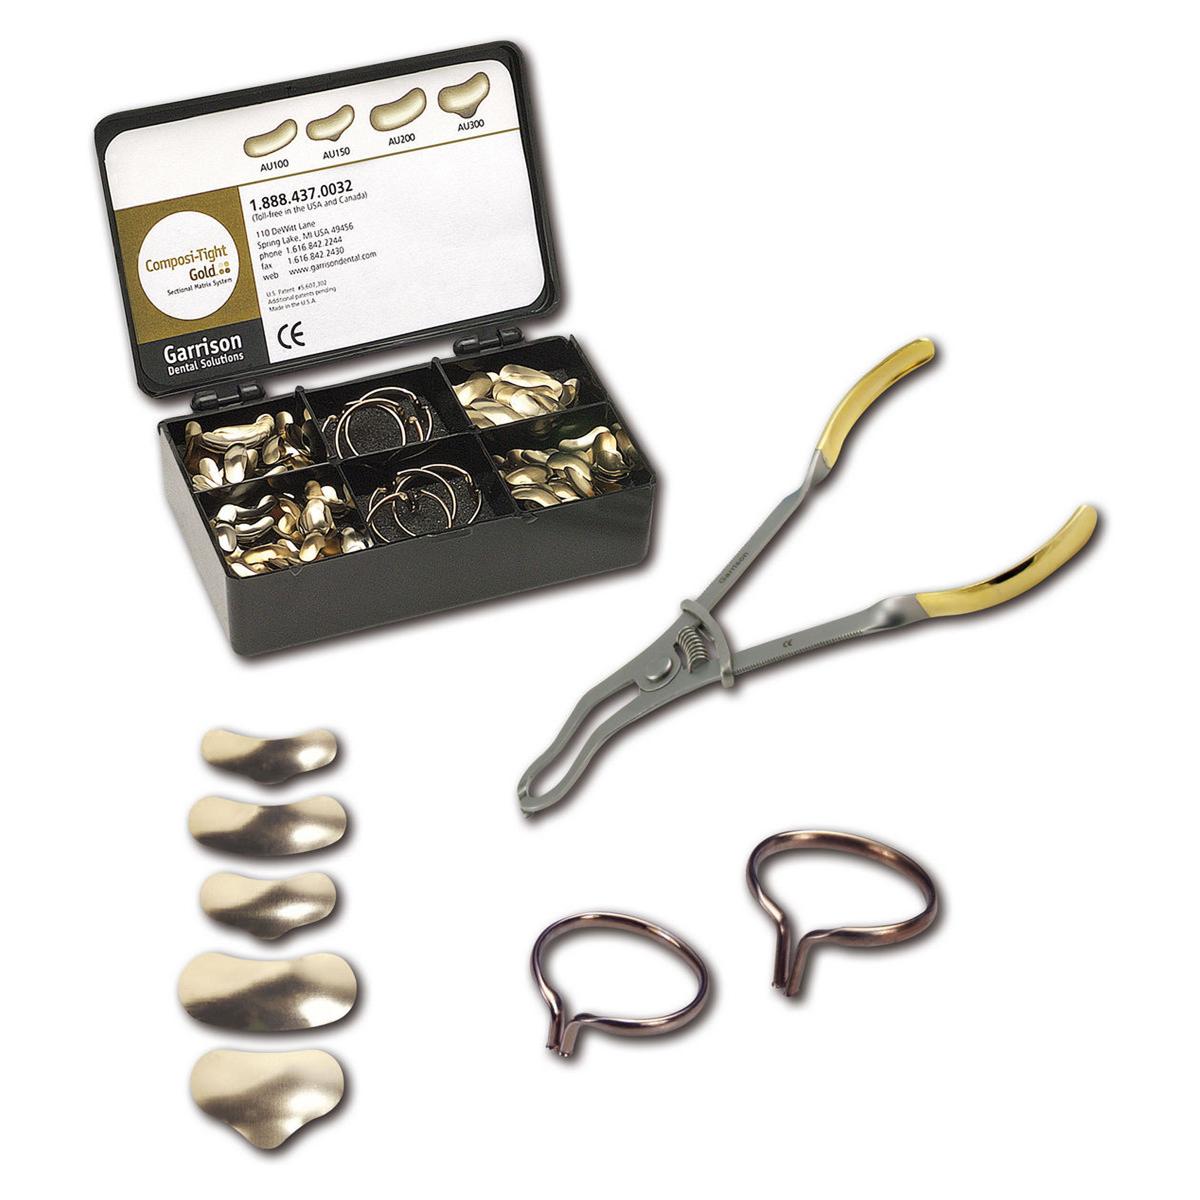 Composi-Tight Gold - kit complet - Set - AUK2